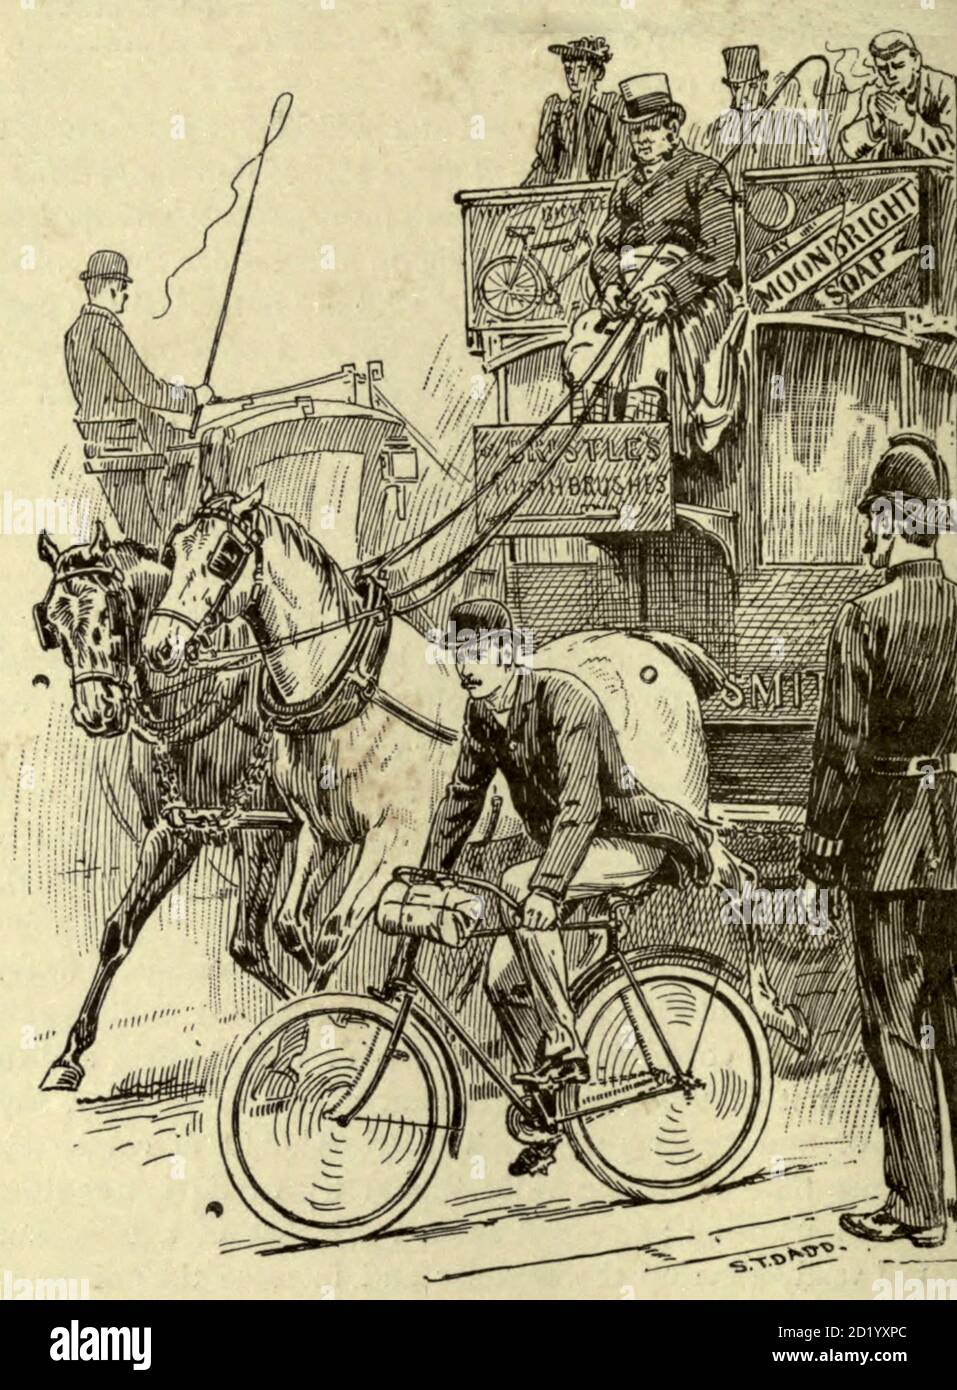 City cyclist 1896 from 'Cycling' by The right Hon. Earl of Albemarle, William Coutts Keppel, (1832-1894) and George Lacy Hillier (1856-1941); Joseph Pennell (1857-1926) Published by London and Bombay : Longmans, Green and co. in 1896. The Badminton Library [Not much has changes in the last 150 years] Stock Photo